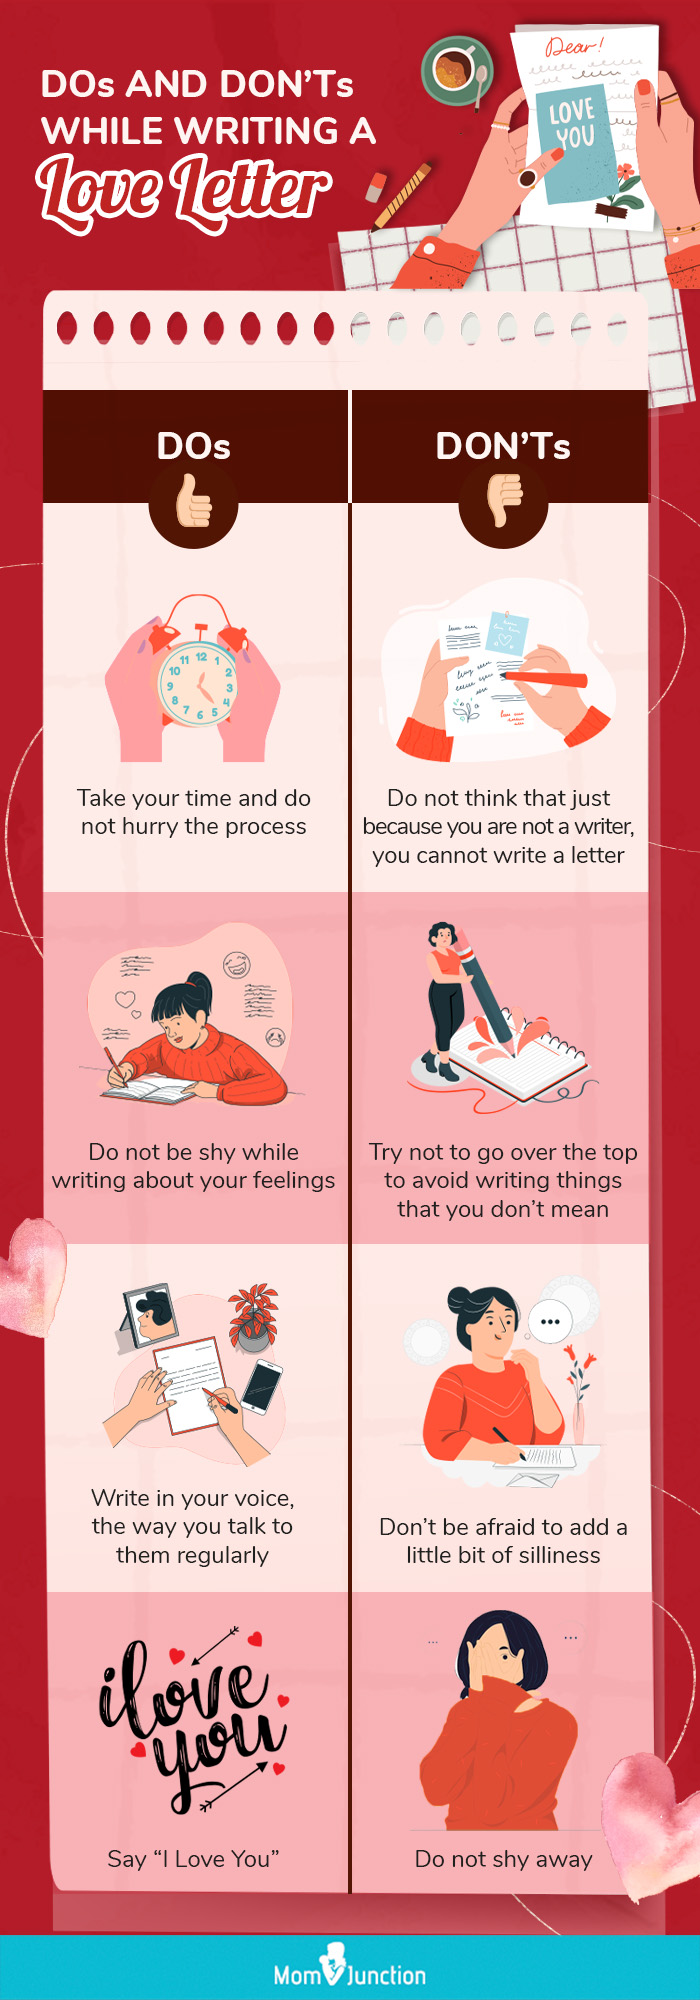 dos and donts while writing a love letter [infographic]